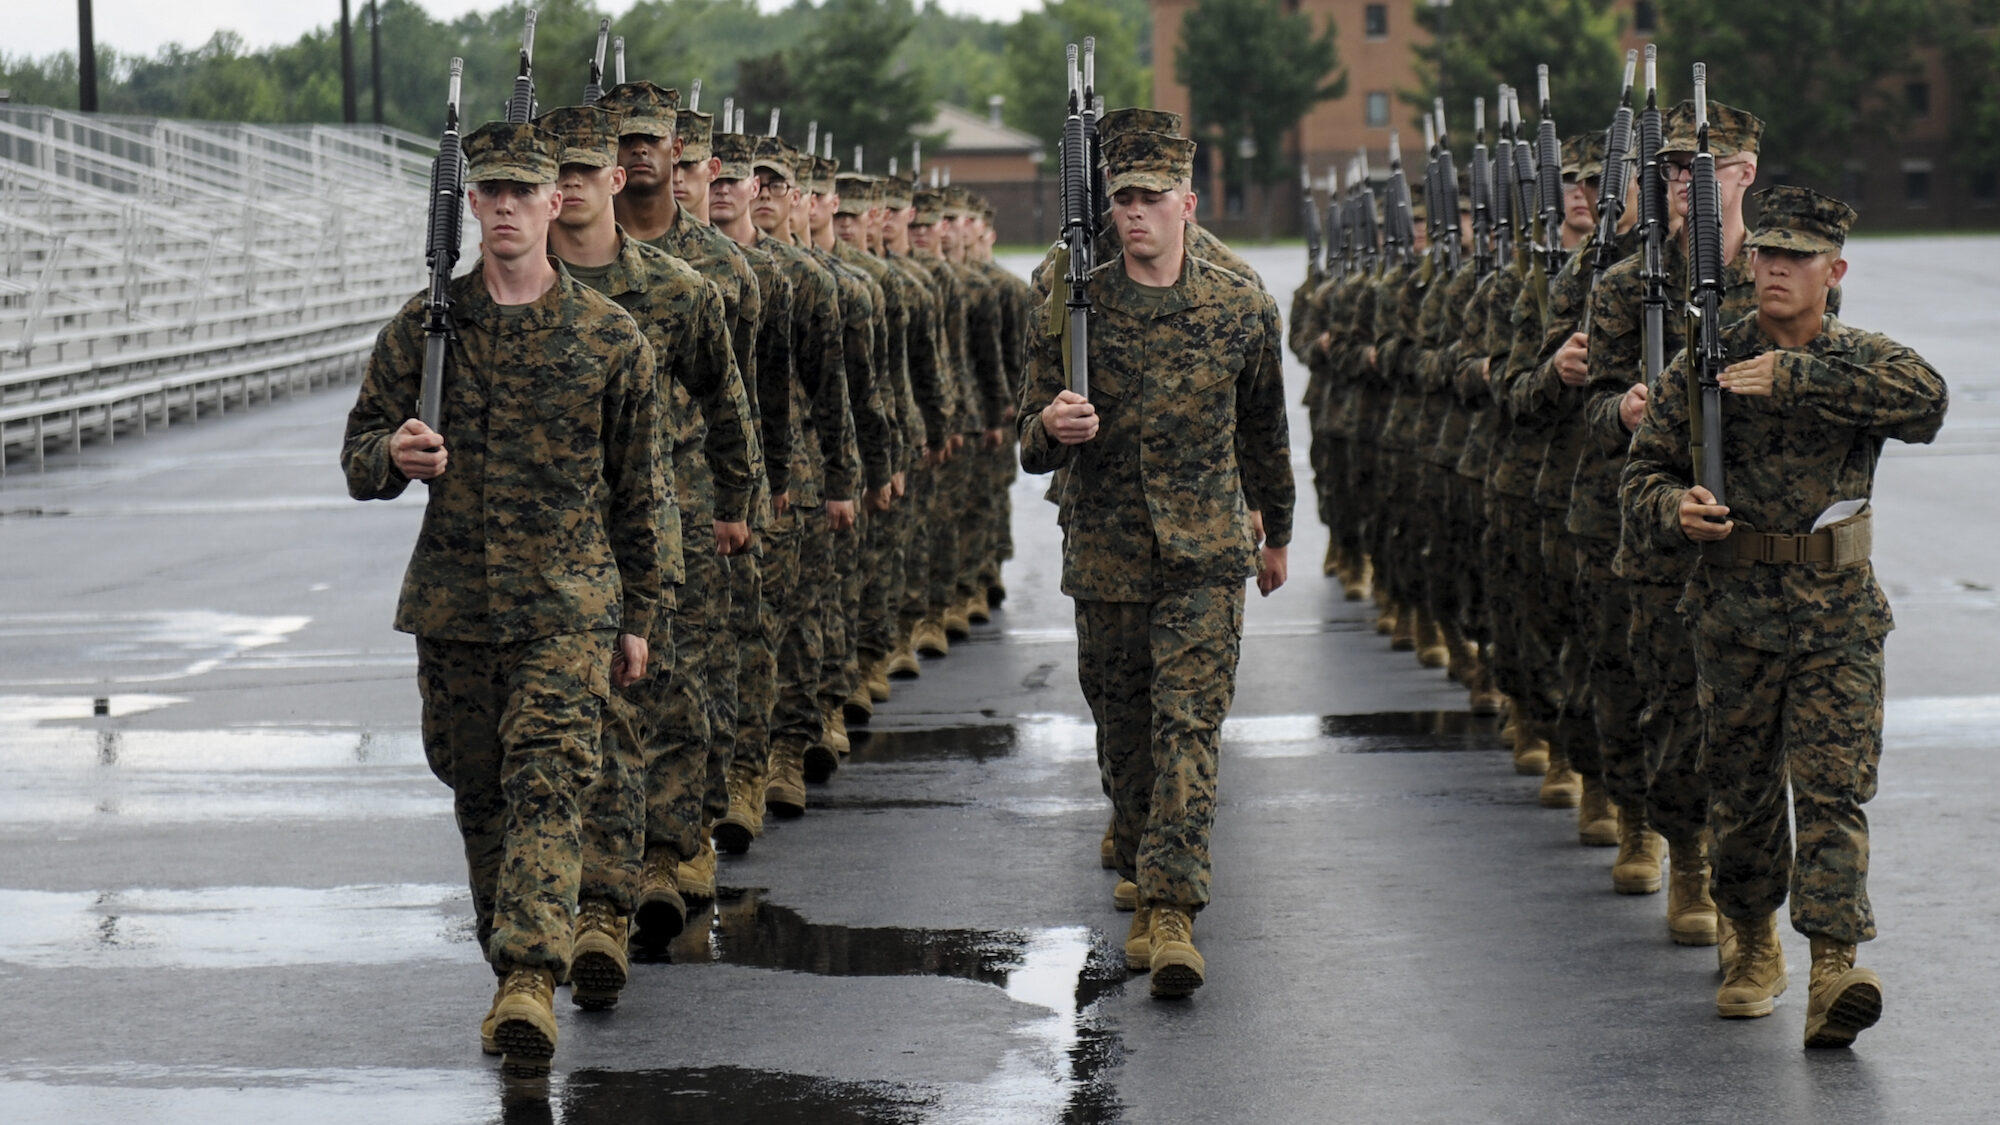 The Marine Corps' culture must become more open and flexible